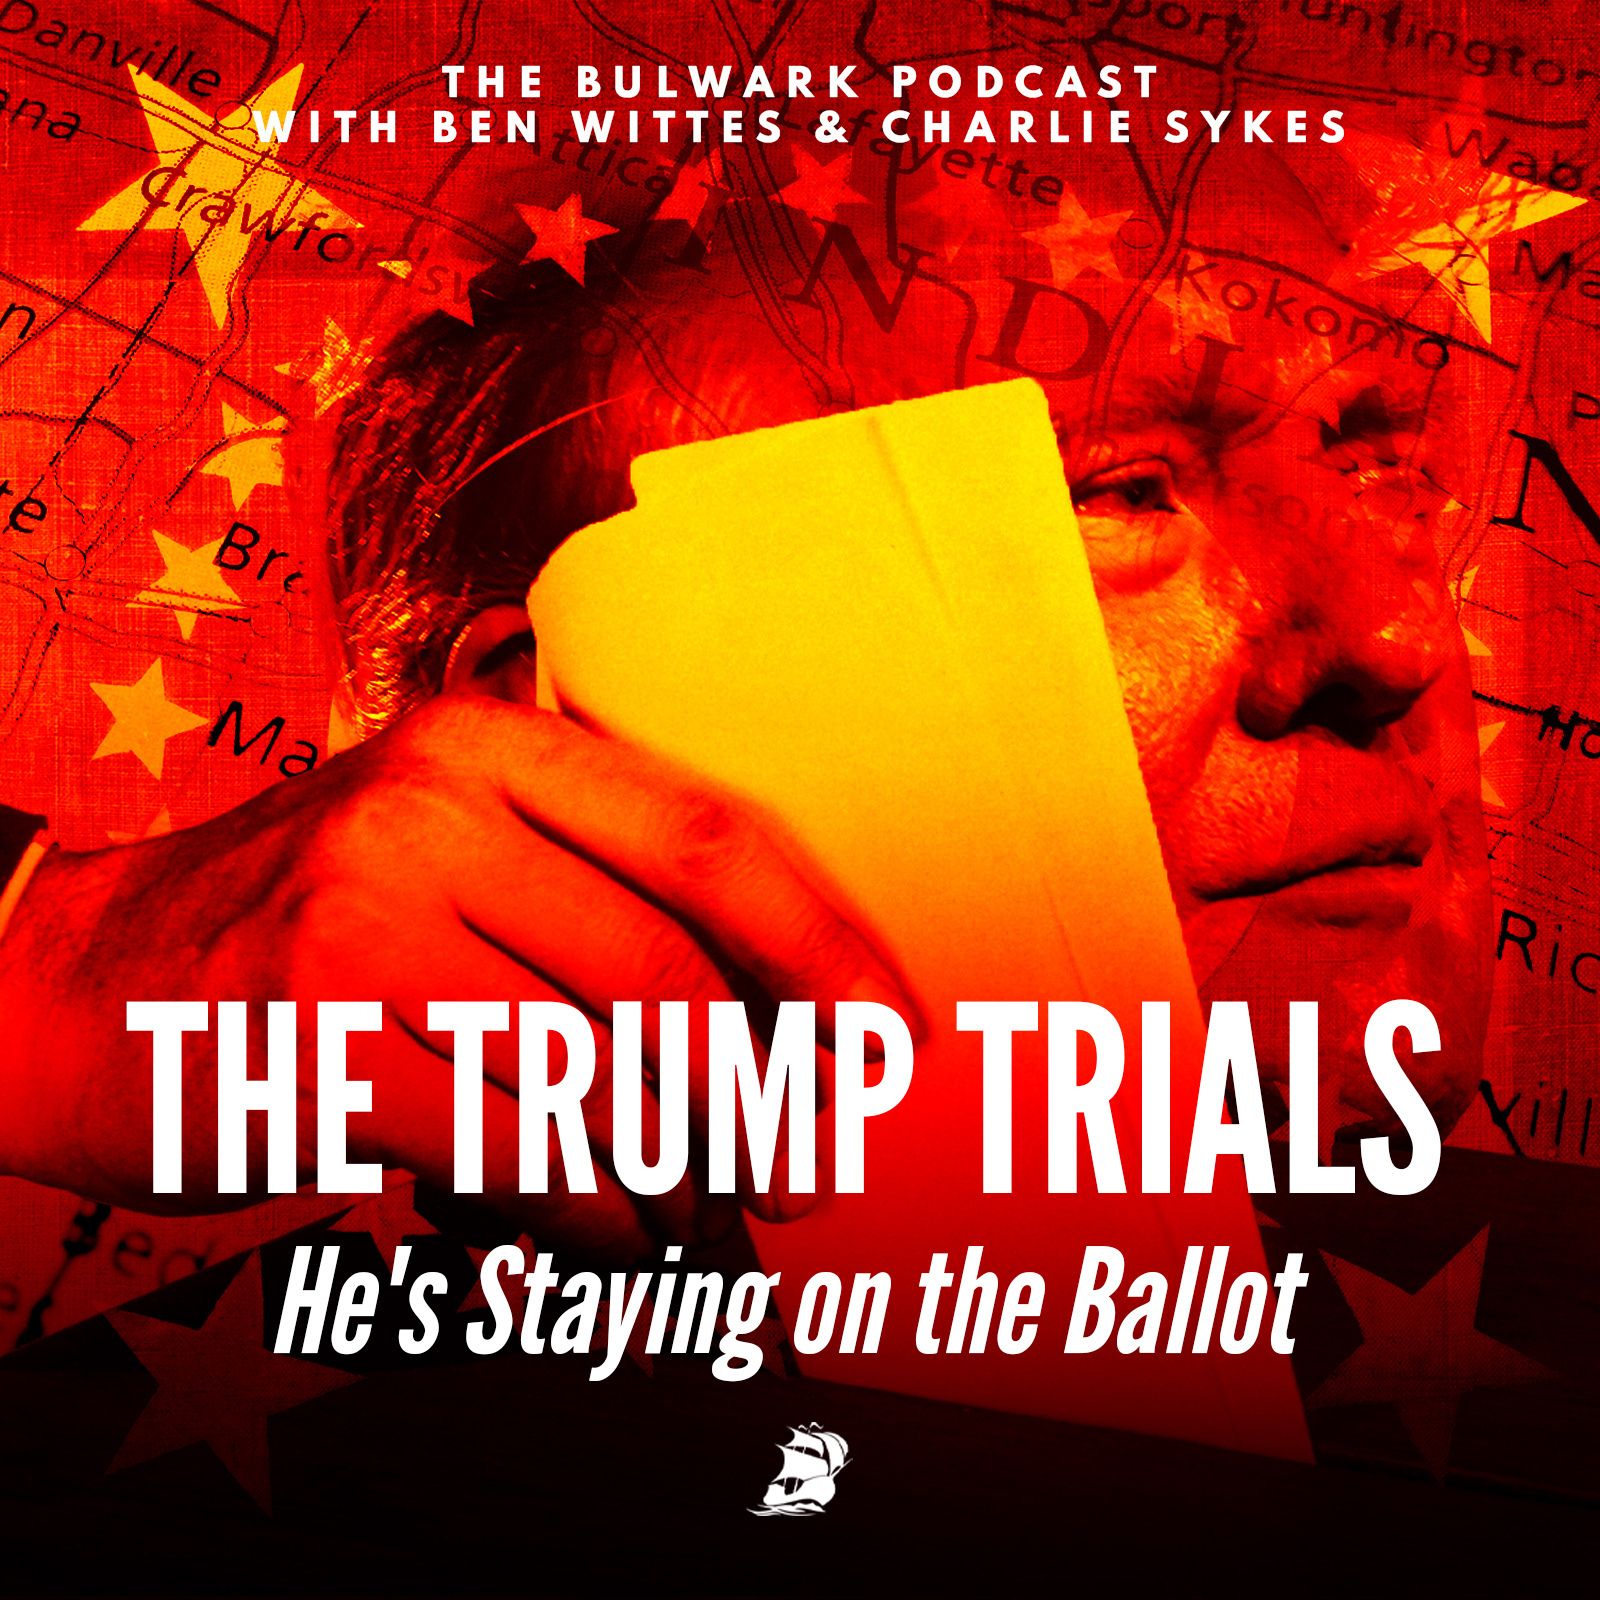 He's Staying on the Ballot by The Bulwark Podcast